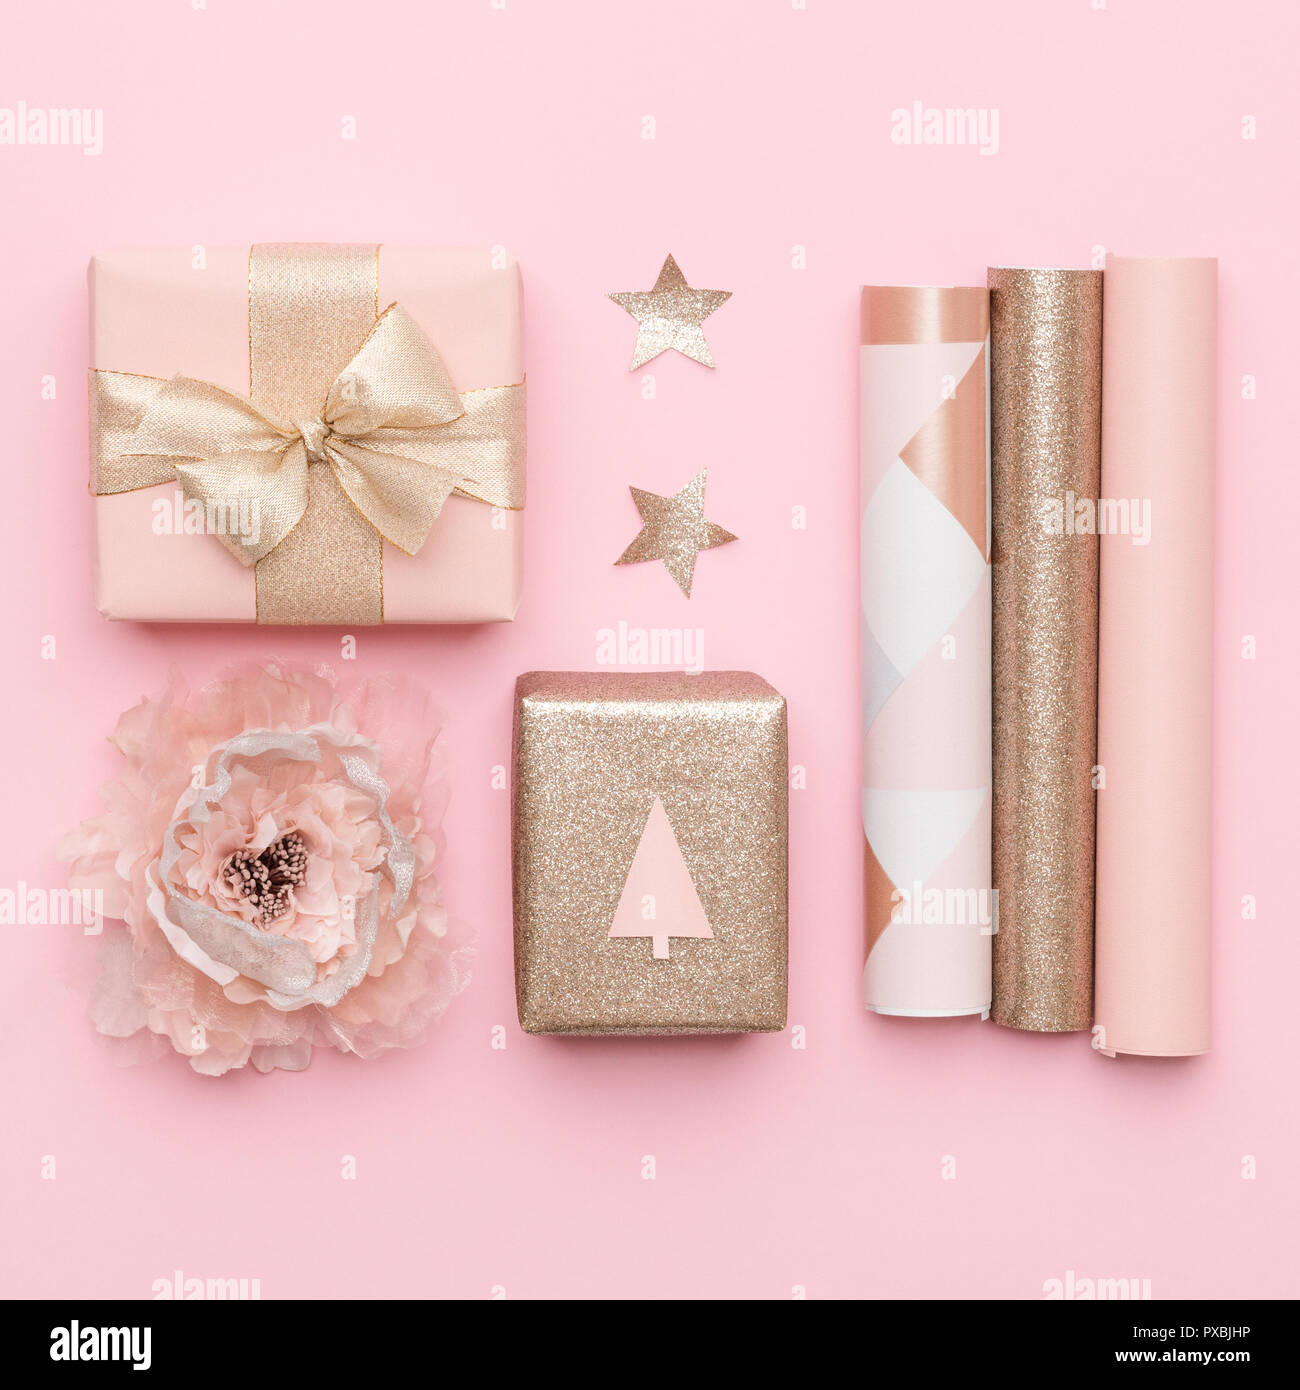 10 Creative Gift Wrapping Ideas  The DIY Mommy